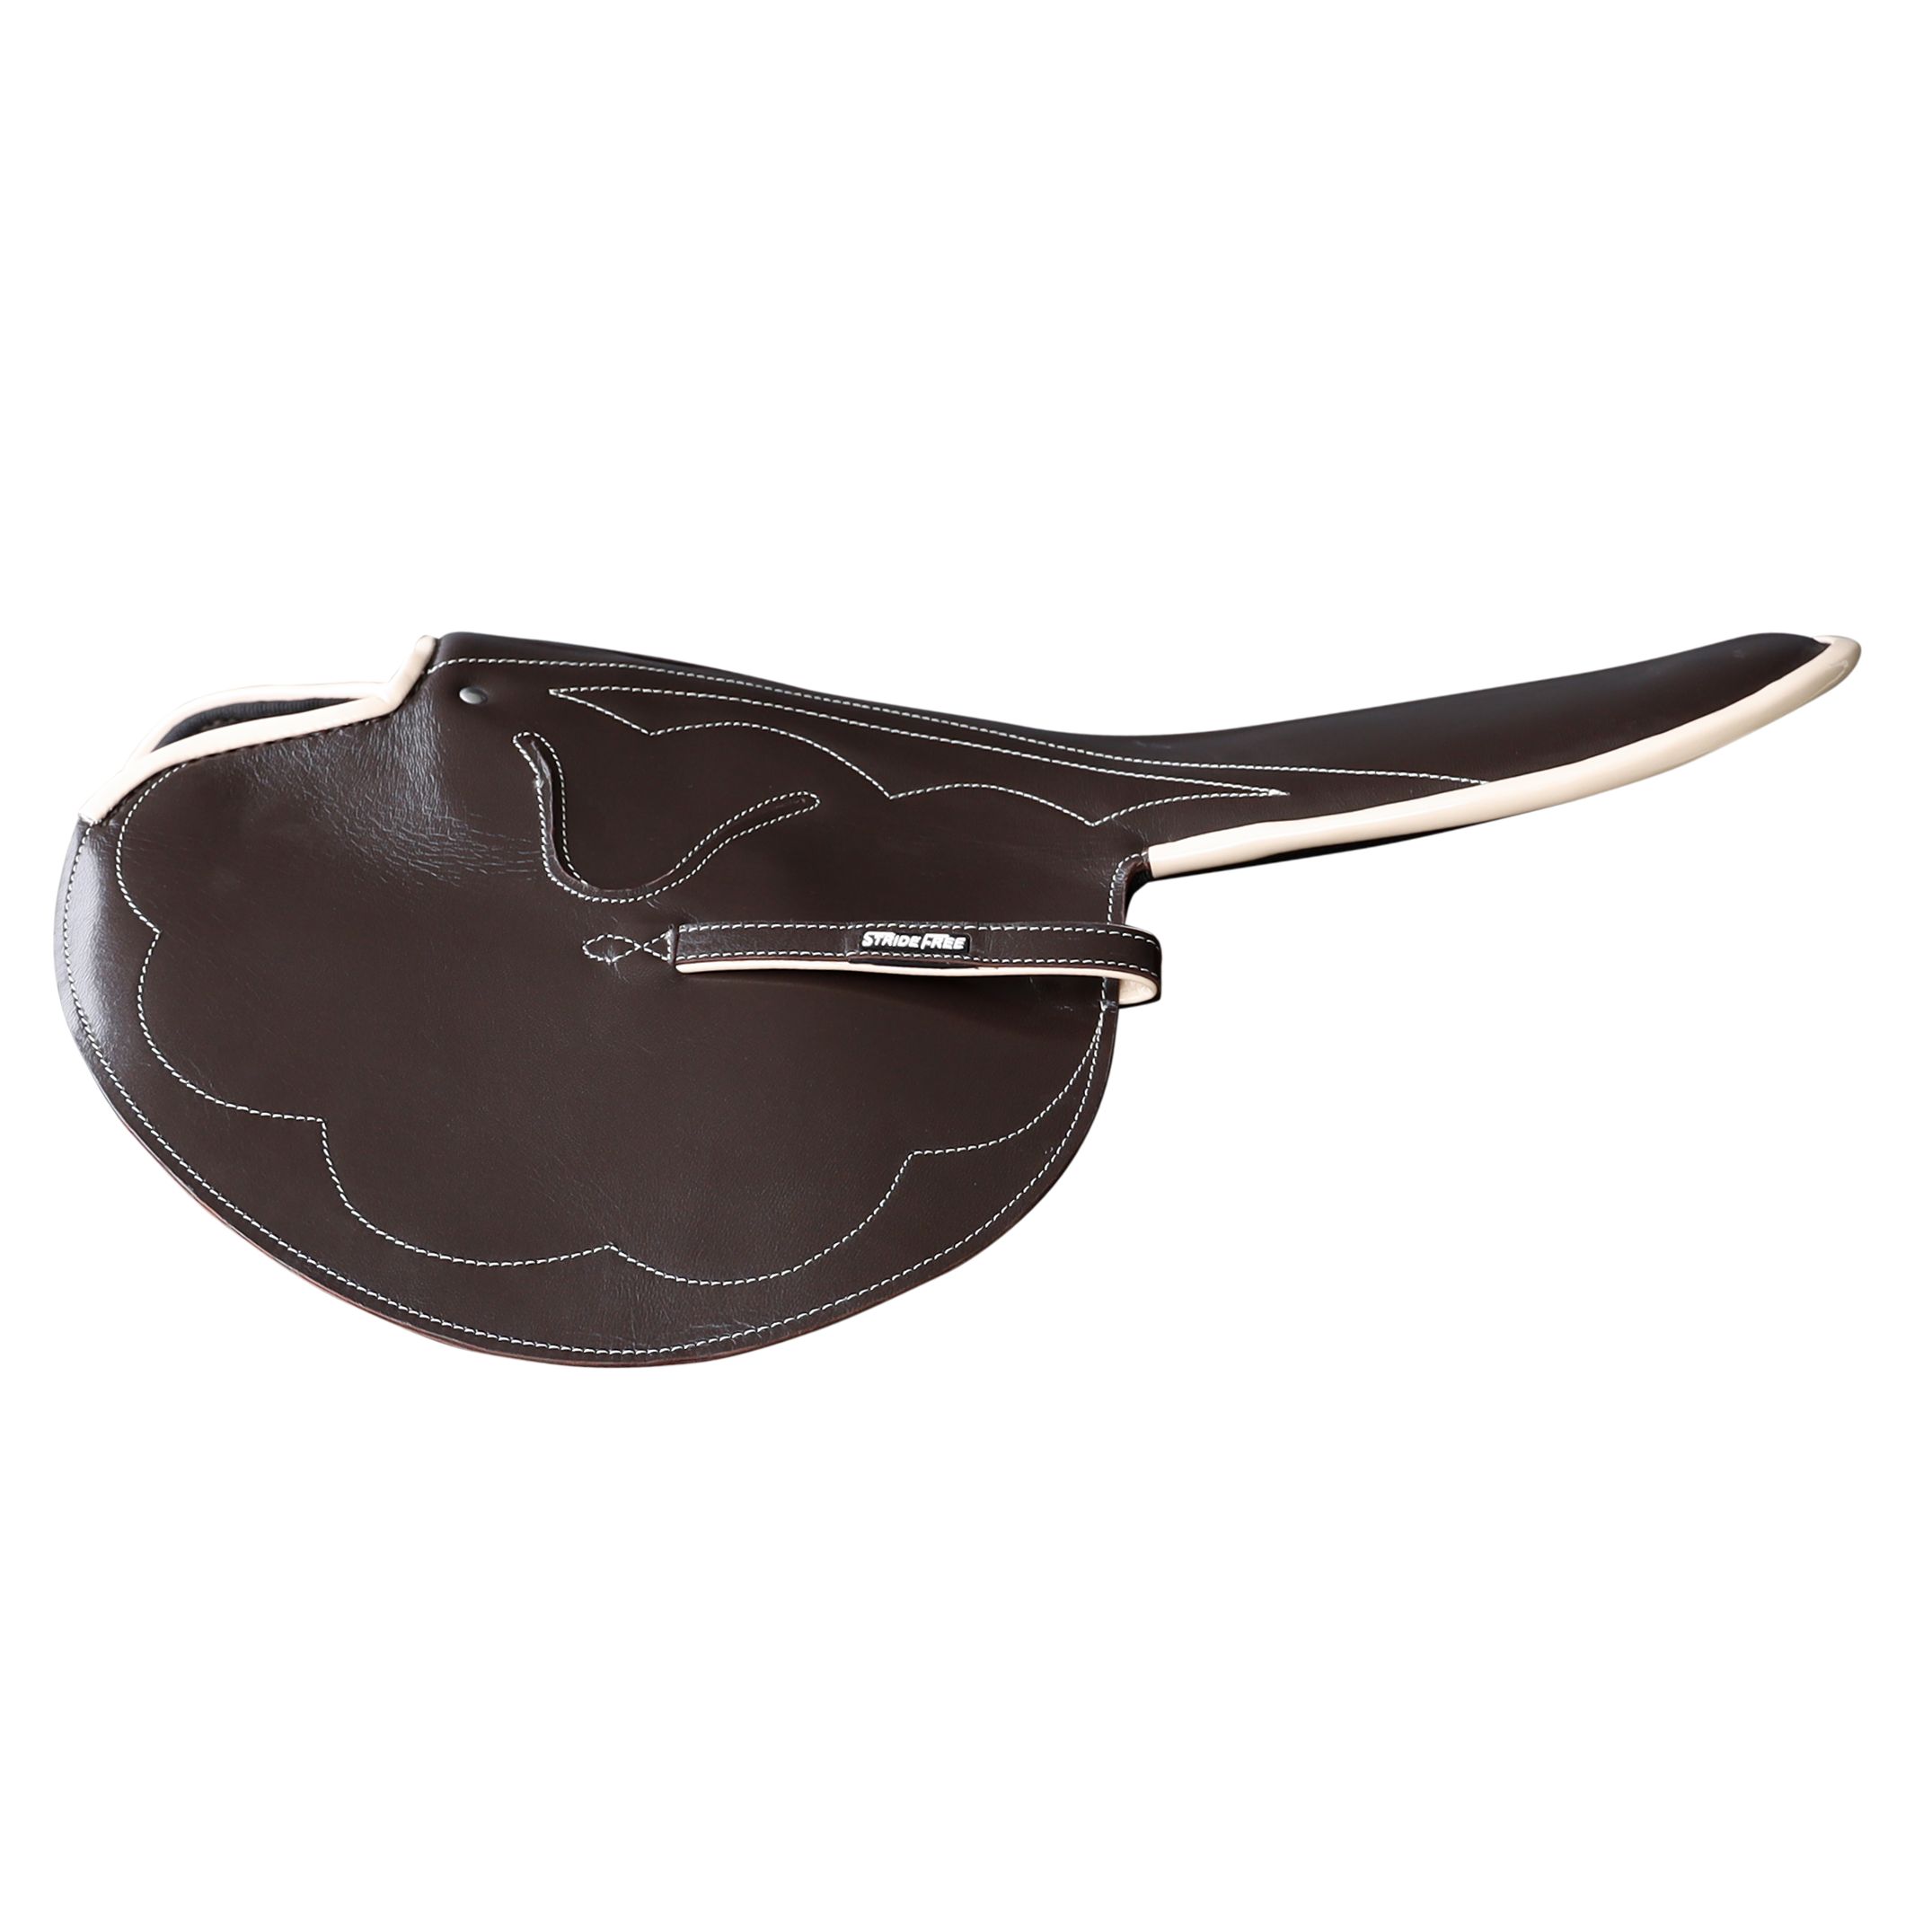 1.4kg Race Saddle Brown Goat Beige Piping Forward Cut